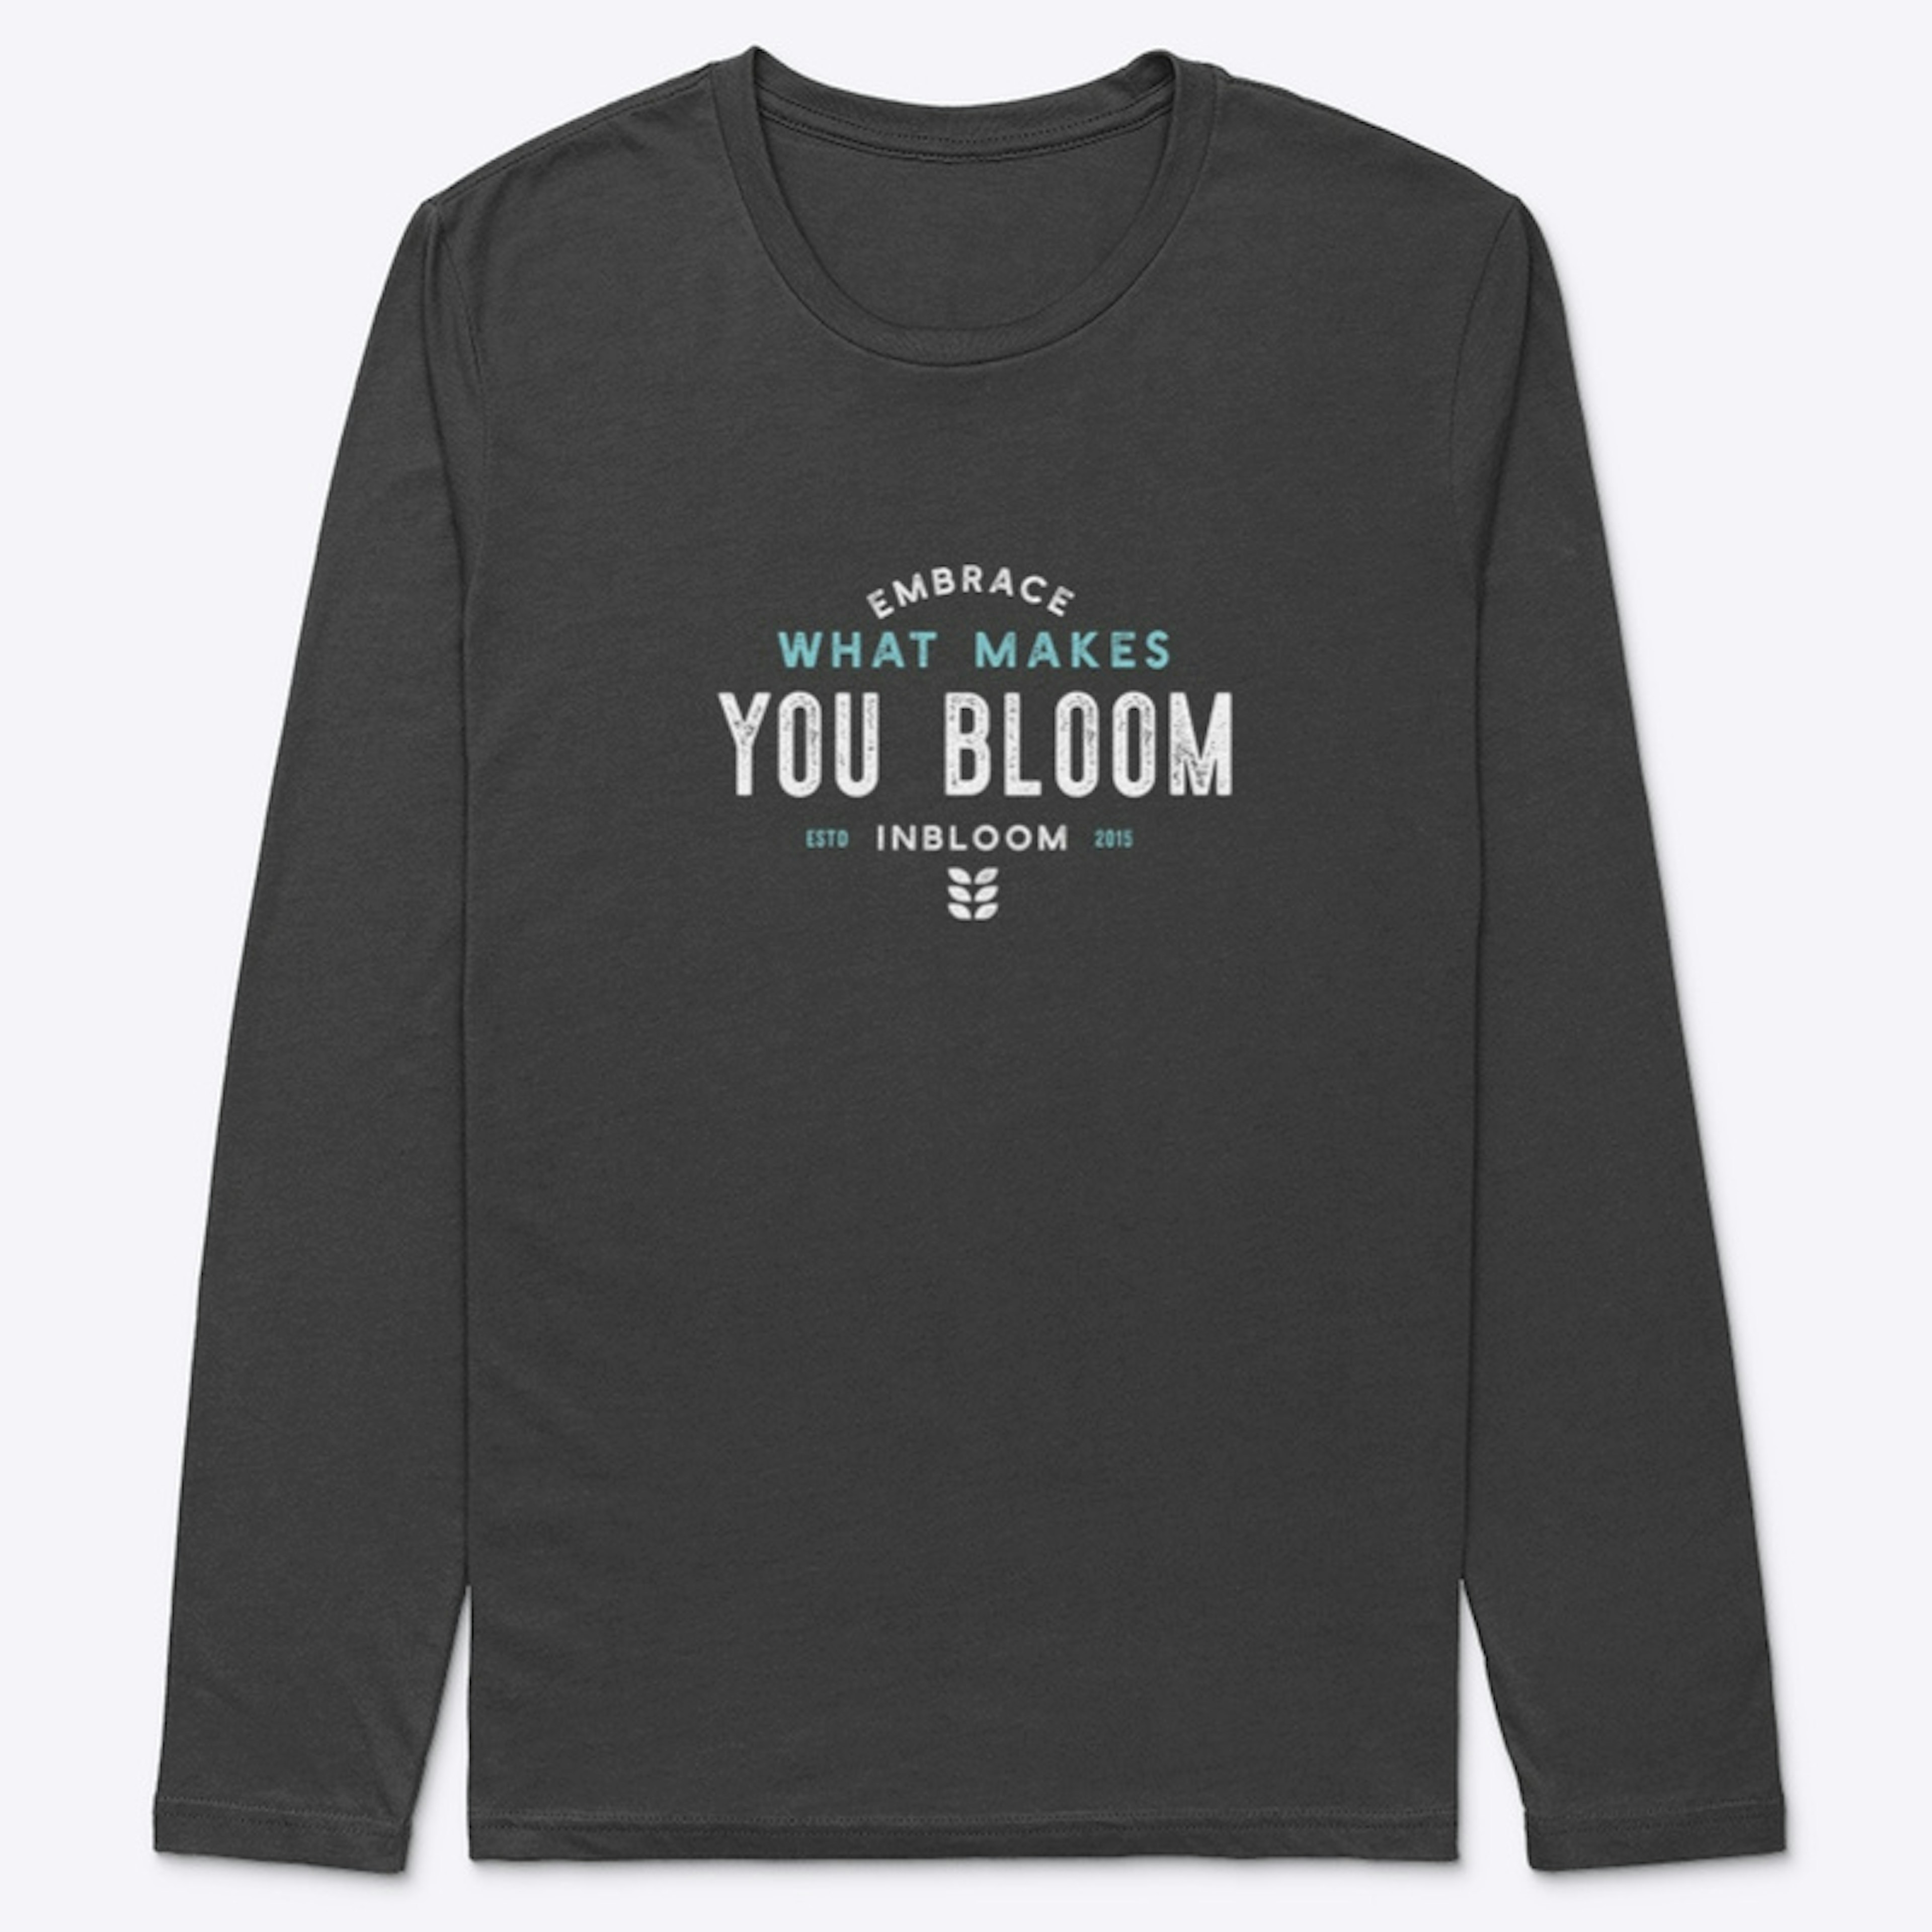 Embrace What Makes You Bloom (Women's)